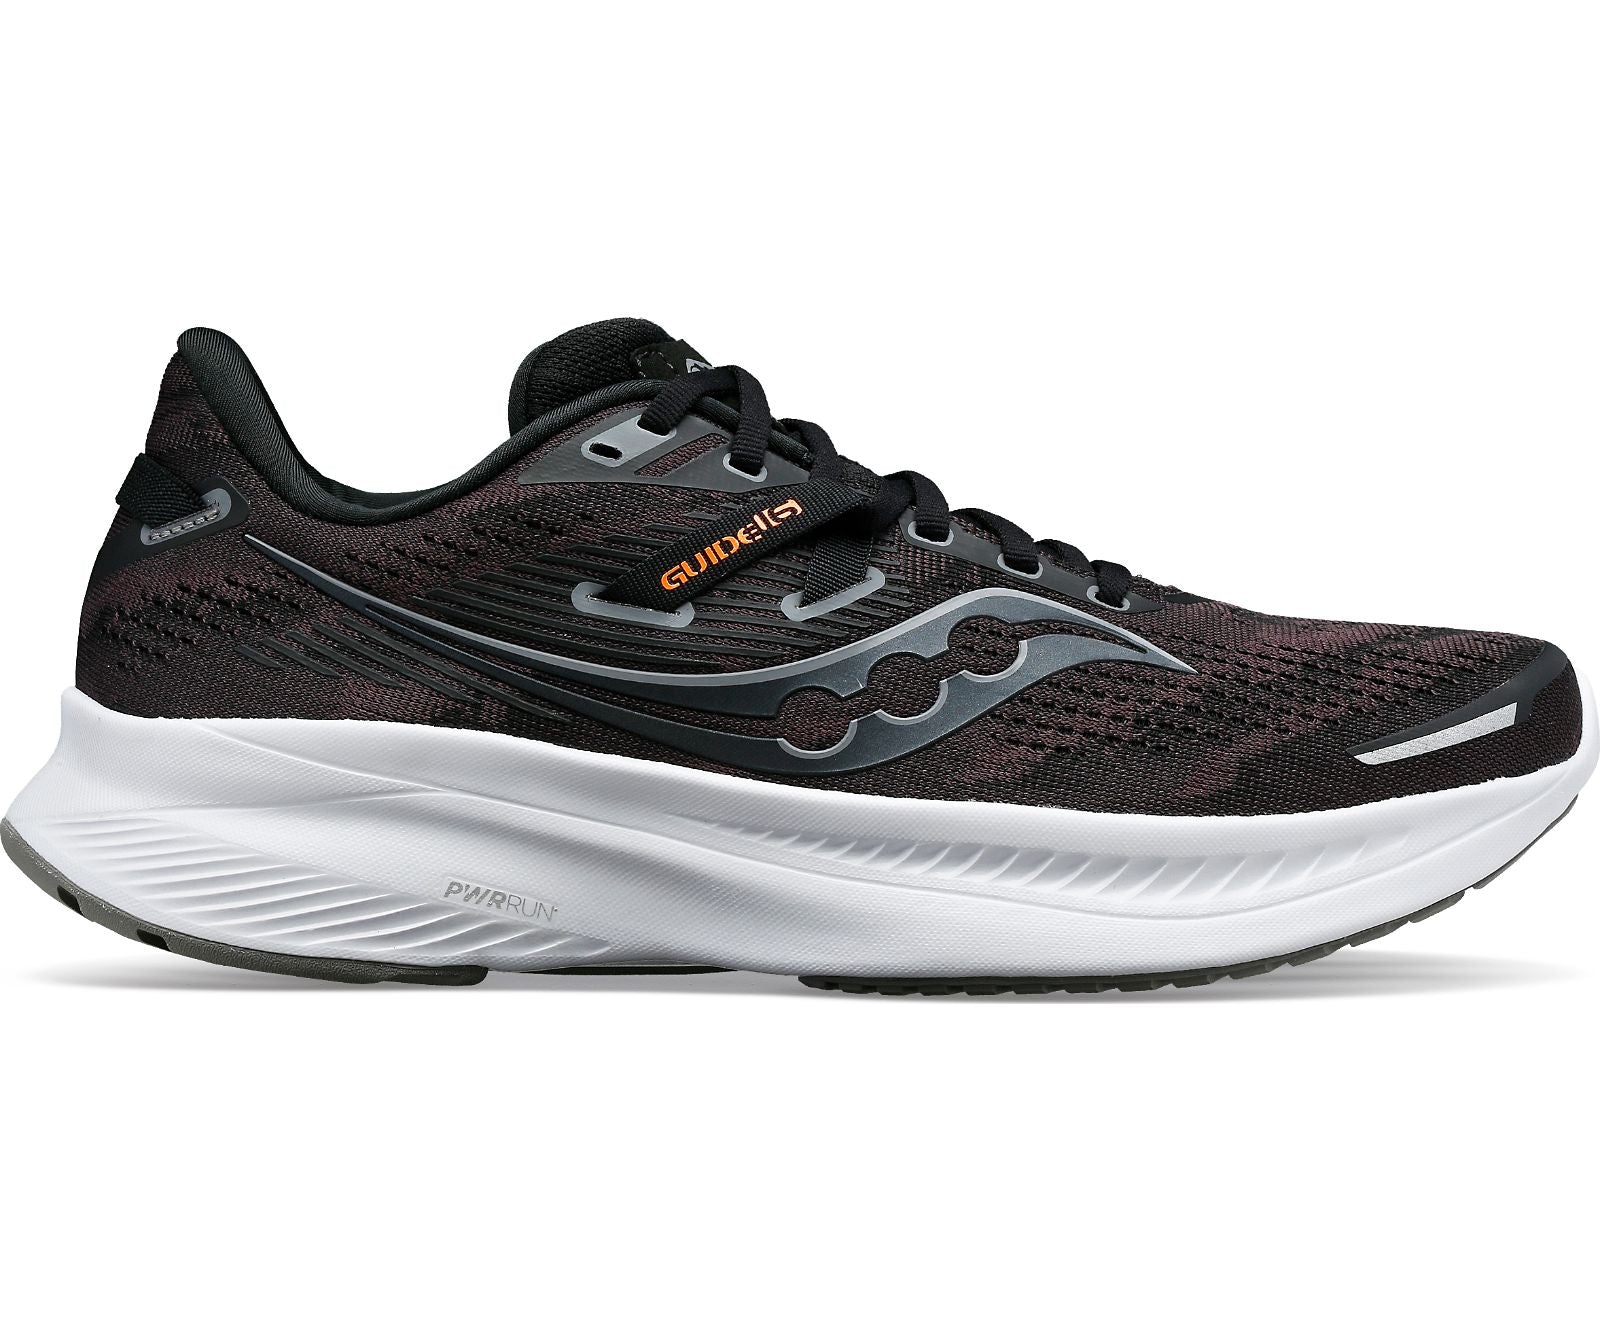 Lateral view of the Men's Guide 16 by Saucony in Black/White